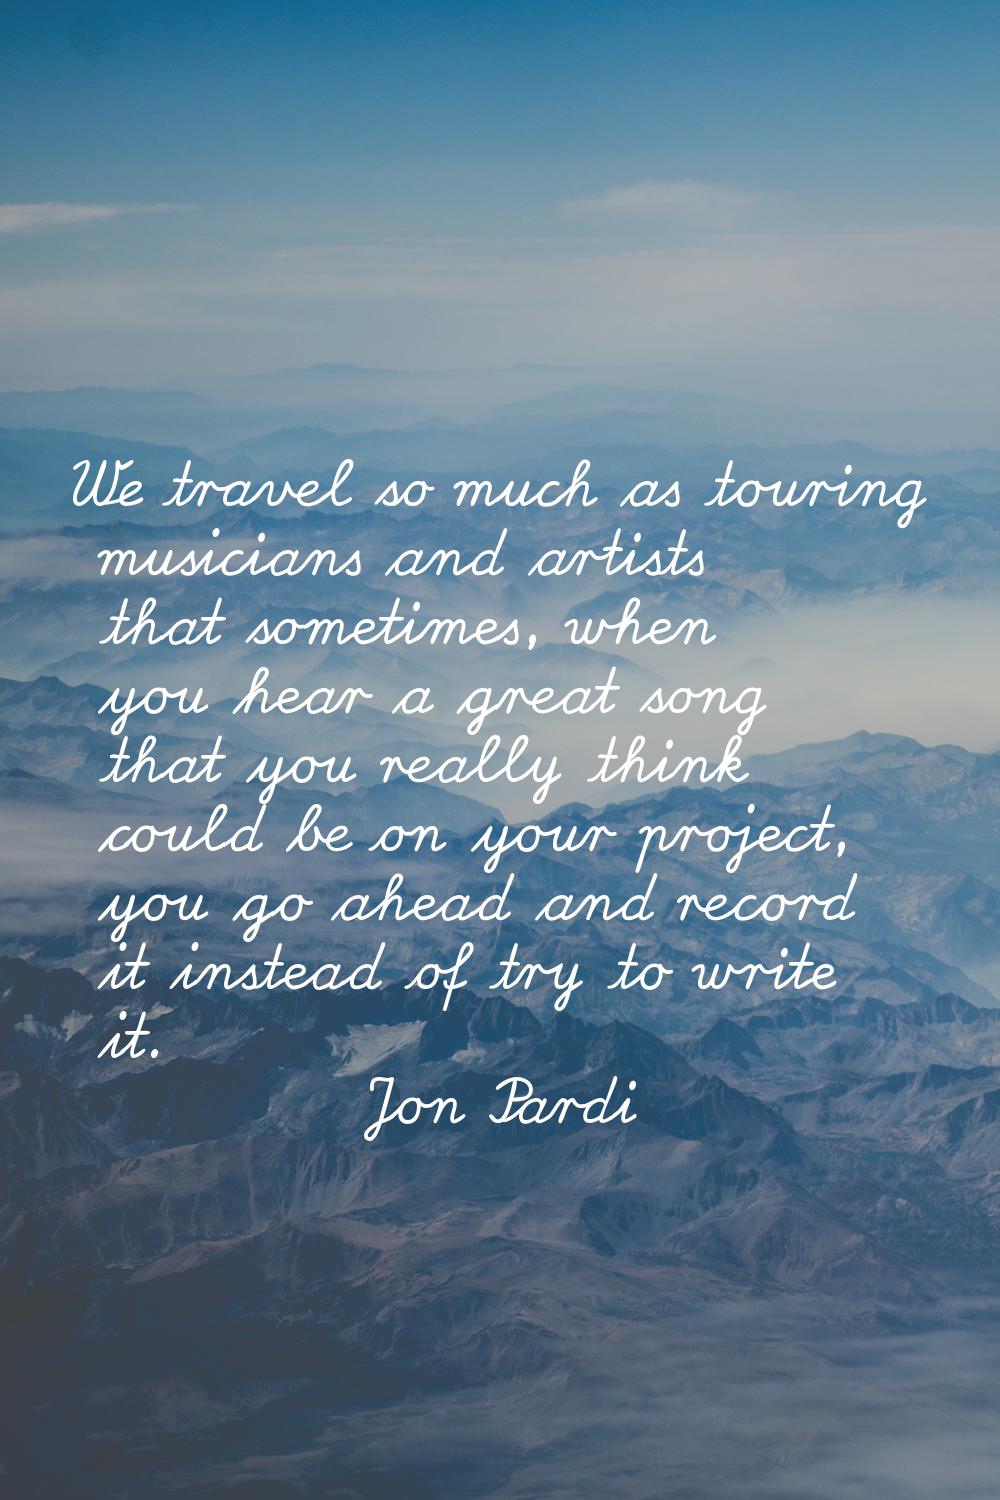 We travel so much as touring musicians and artists that sometimes, when you hear a great song that 